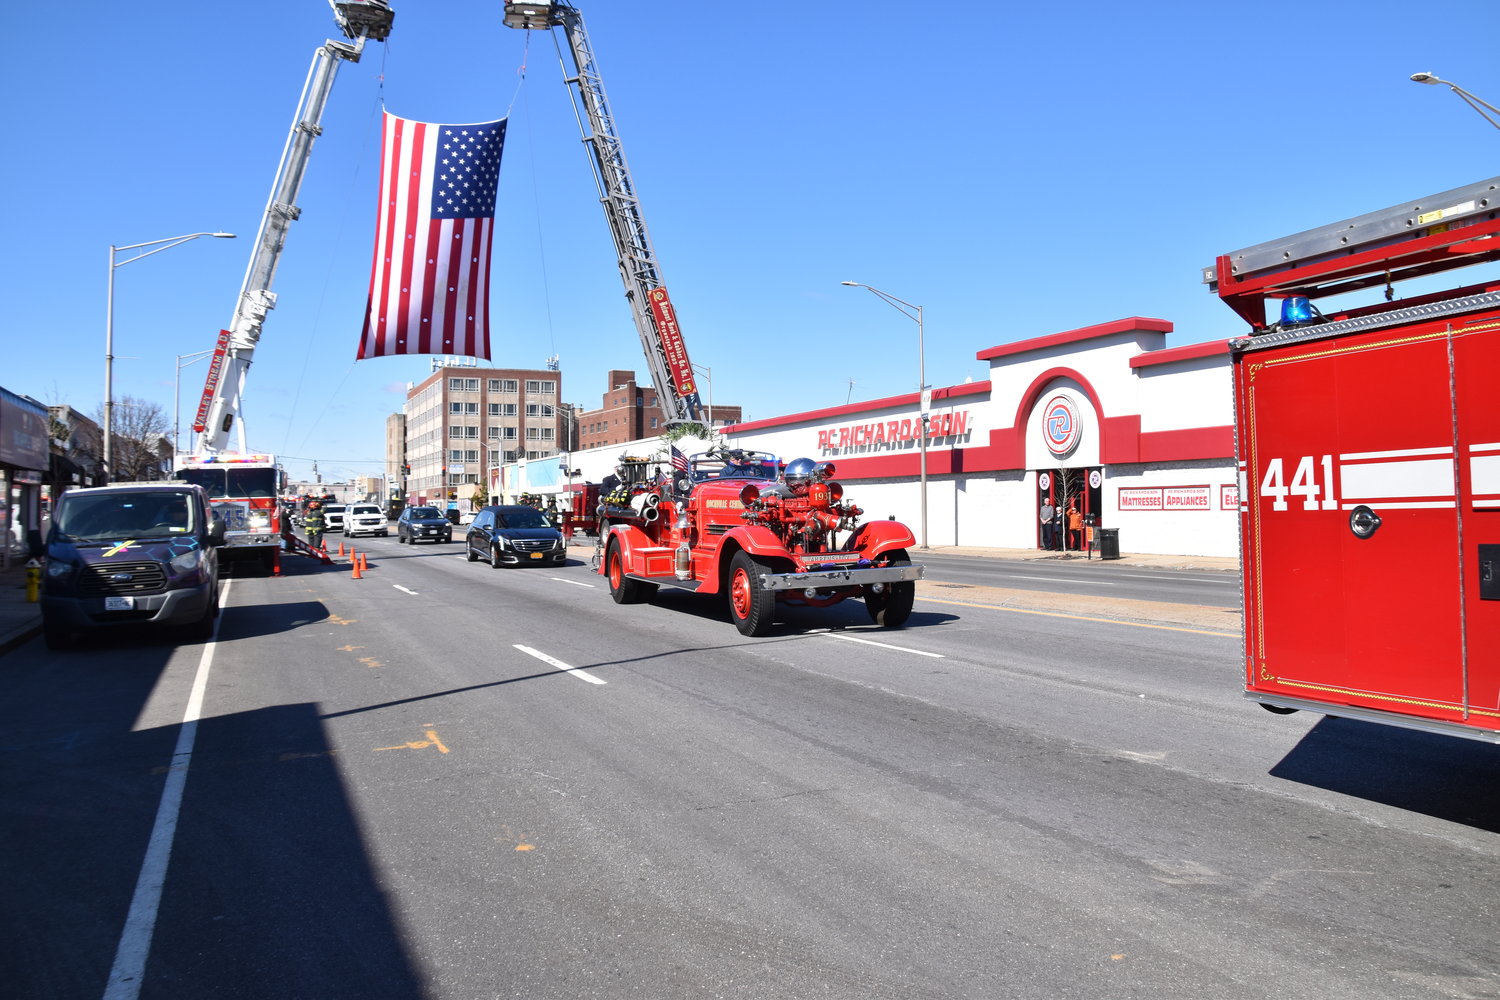 The funeral for Rockville Centre firefighter Robert ‘Bubba’ Seaman passes by P.C. Richard’s on Sunrise Highway, his former place of work.